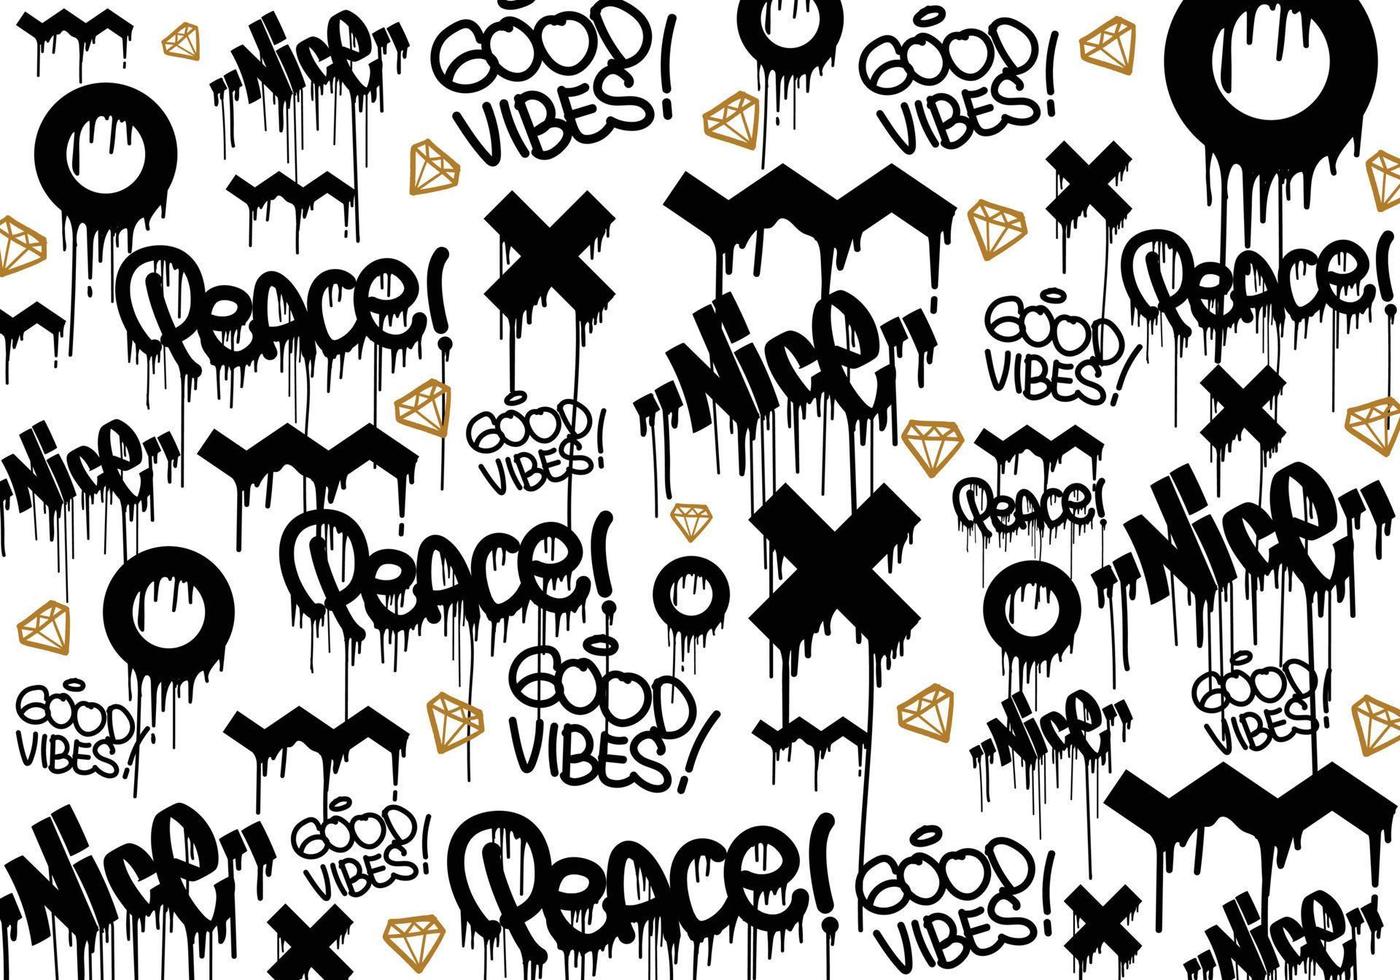 Seamless graffiti art illustration pattern. Graffiti background with throw-up and tagging hand-drawn style. Street art graffiti urban theme for prints, banners, and textiles in vector format.